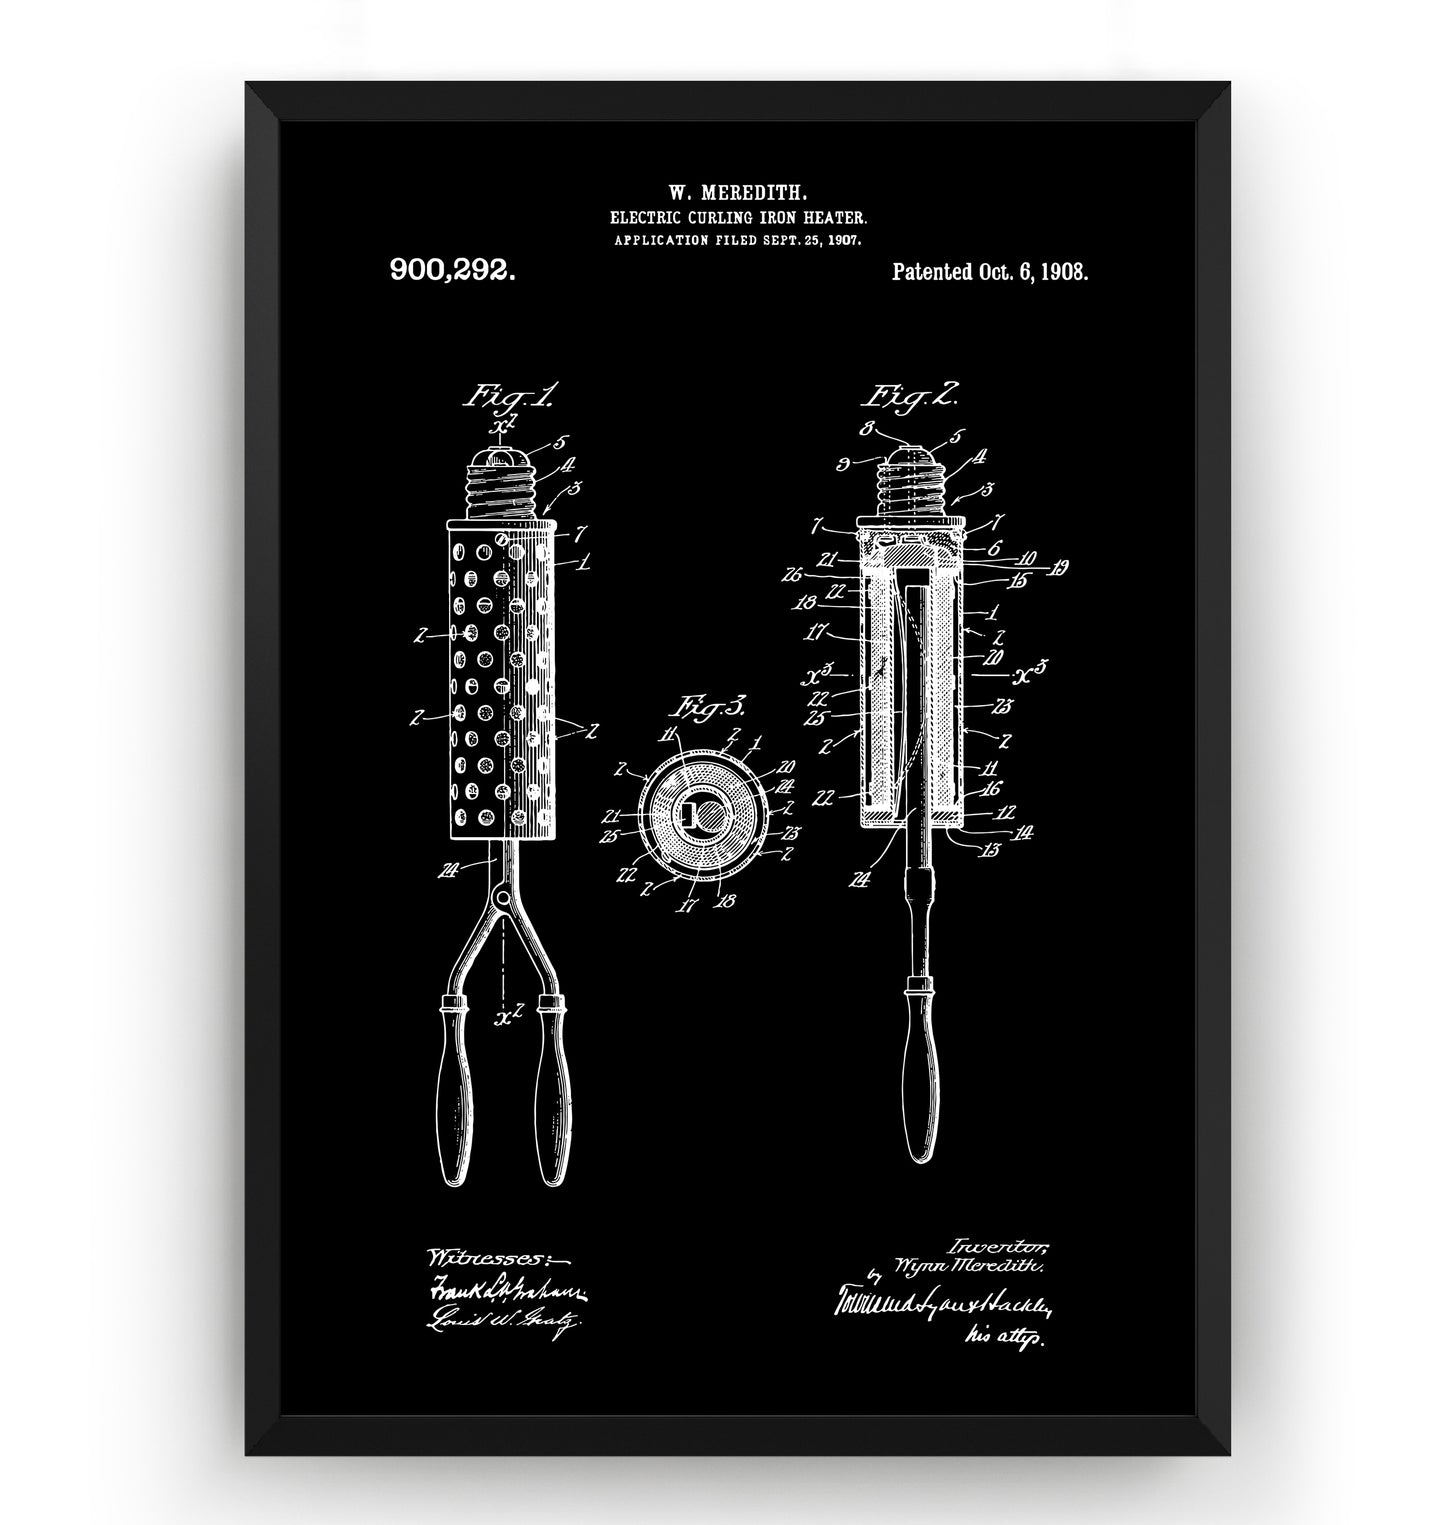 Electric Curling Iron Heater 1907 Patent Print - Magic Posters